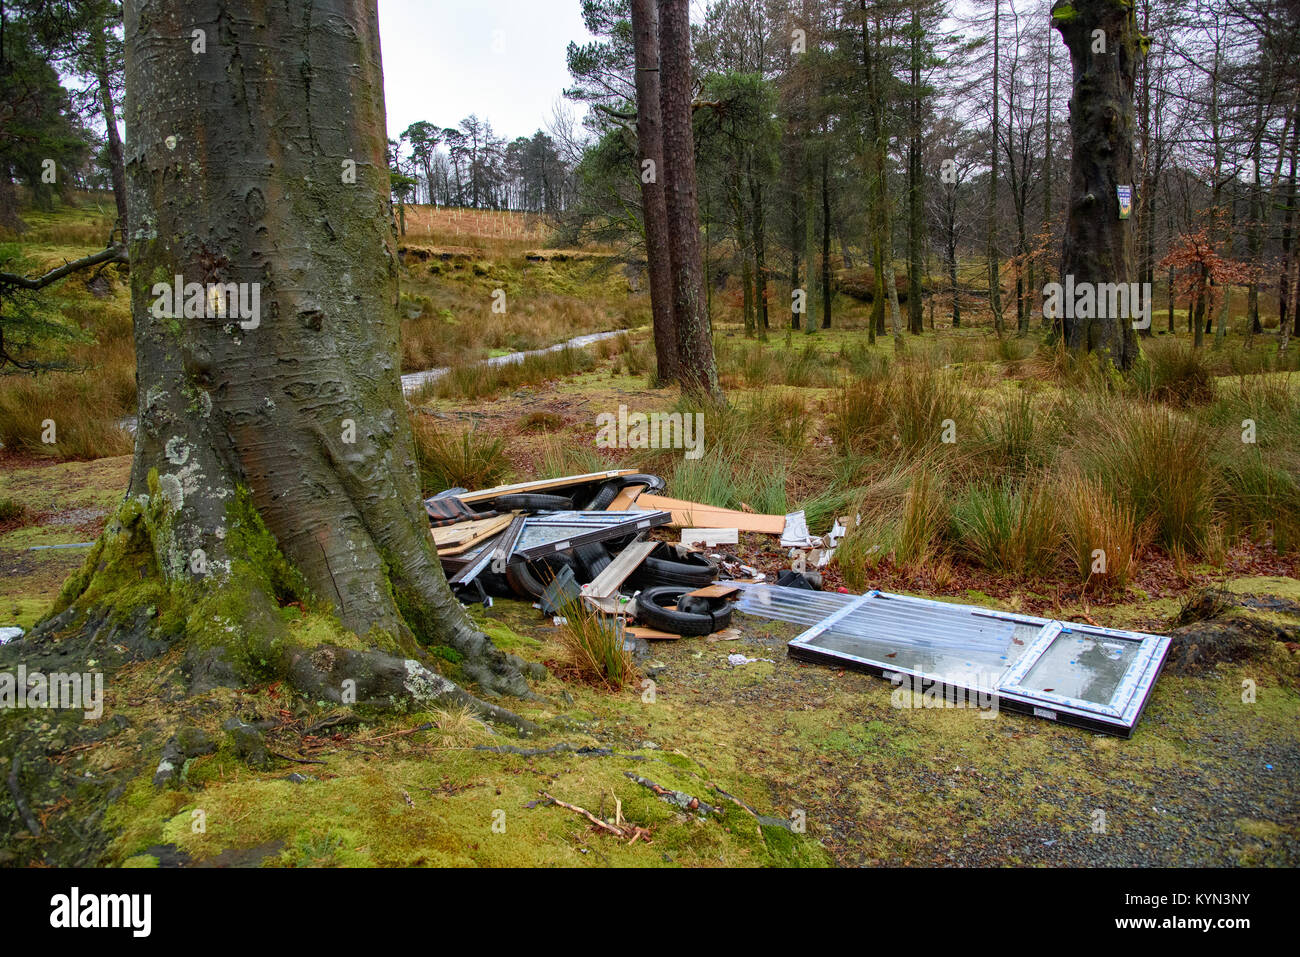 Fly tipping in an Area of Outstanding Natural Beauty. Rubbish dumped in the Forest of Bowland, Marshaw, Lancaster, Lancashire, United Kingdom. 15.1.18 Stock Photo